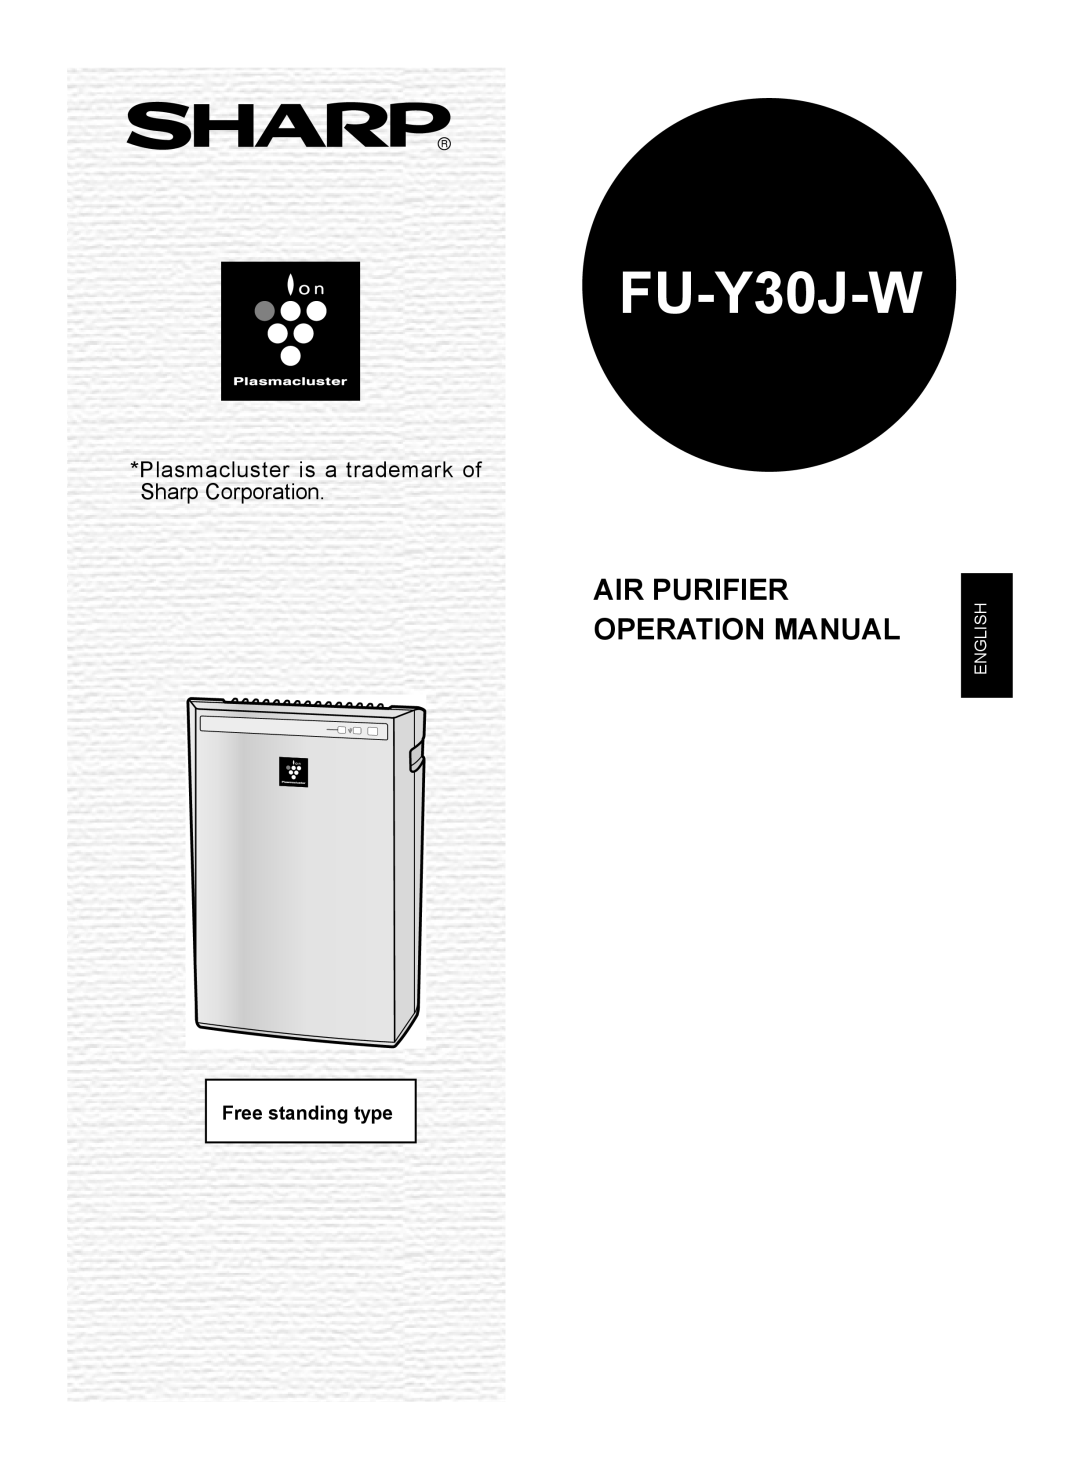 Sharp FU-Y30J-W operation manual Plasmacluster is a trademark of Sharp Corporation, Free standing type, English 